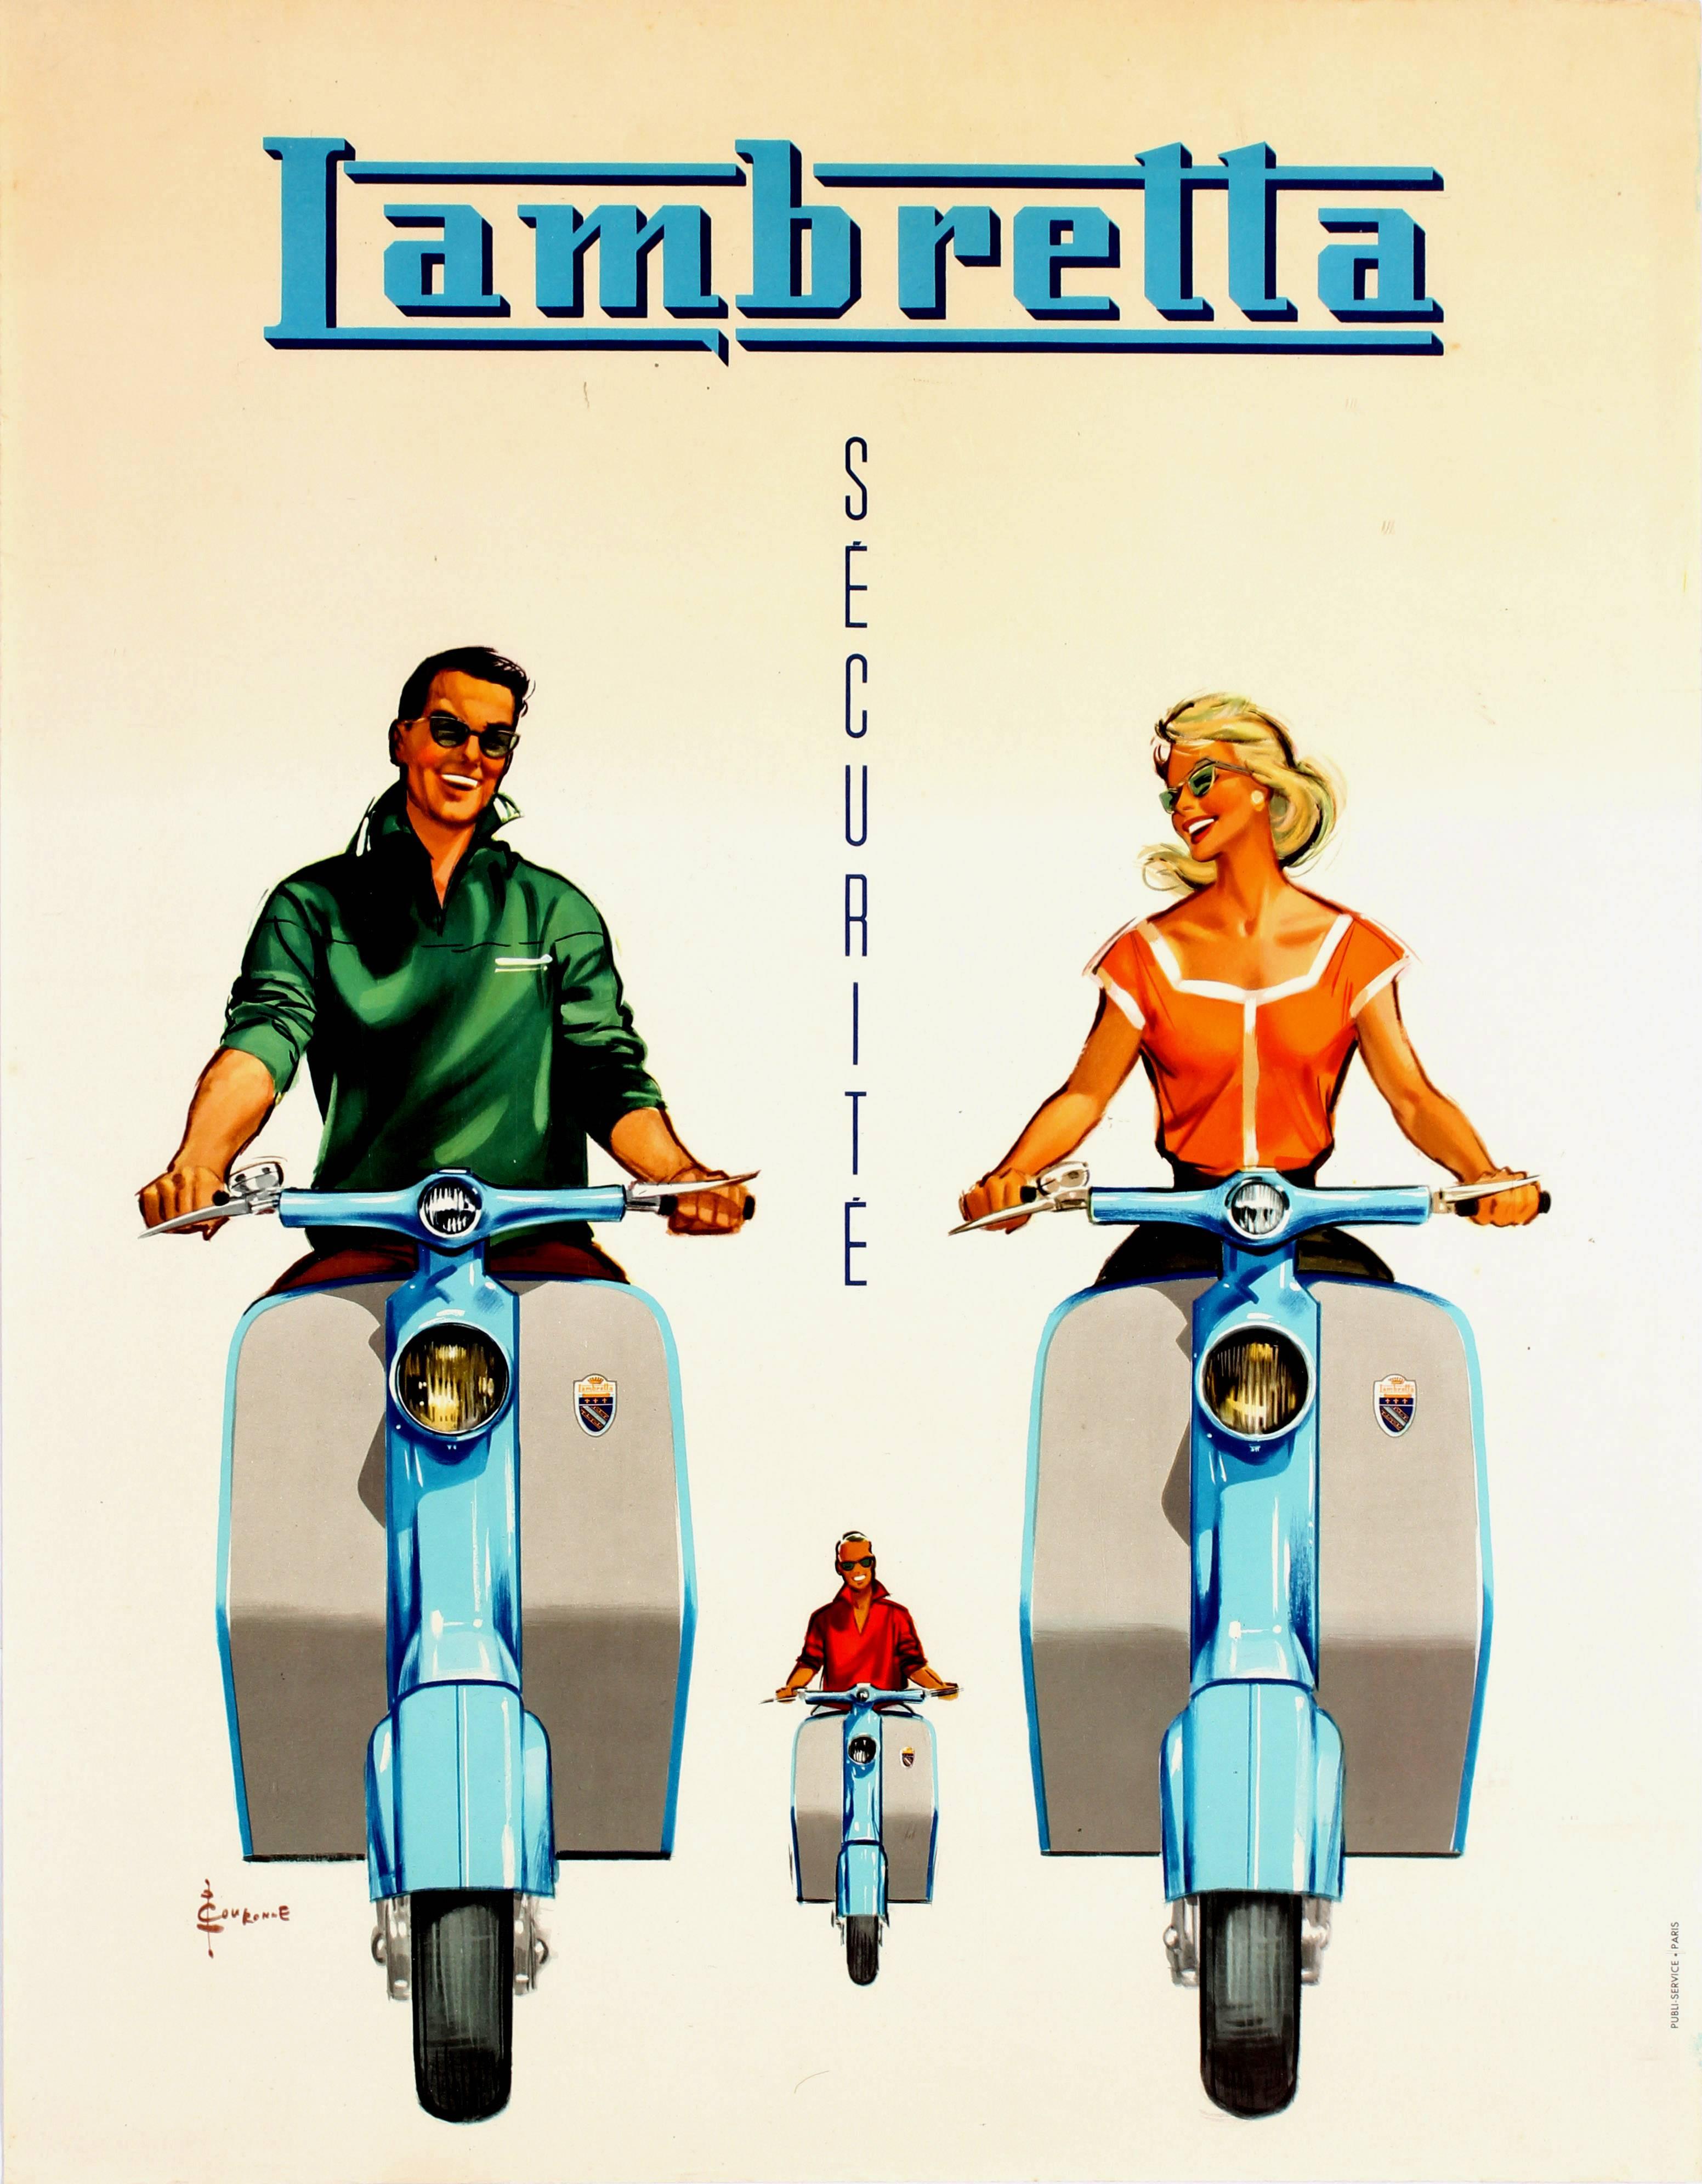 Couronne Print - Original Vintage Advertising Poster For Lambretta Scooters - Securite / Security